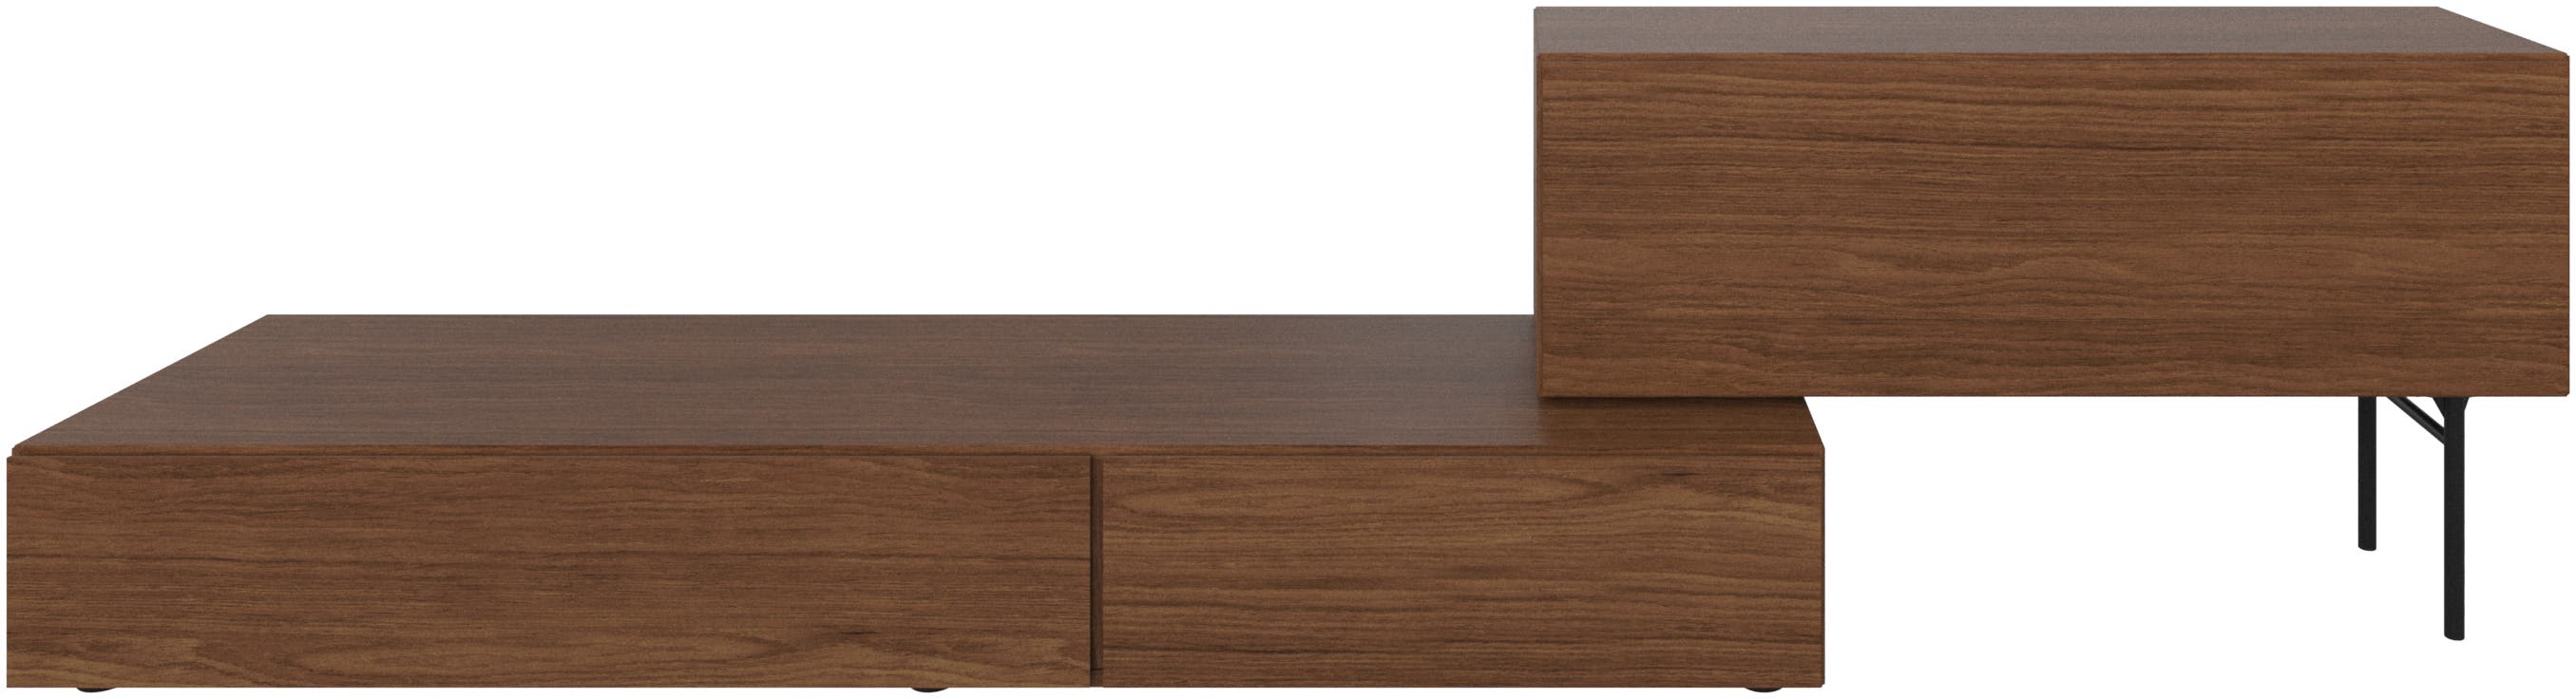 Lugano wall system with drop-down doors and drawer